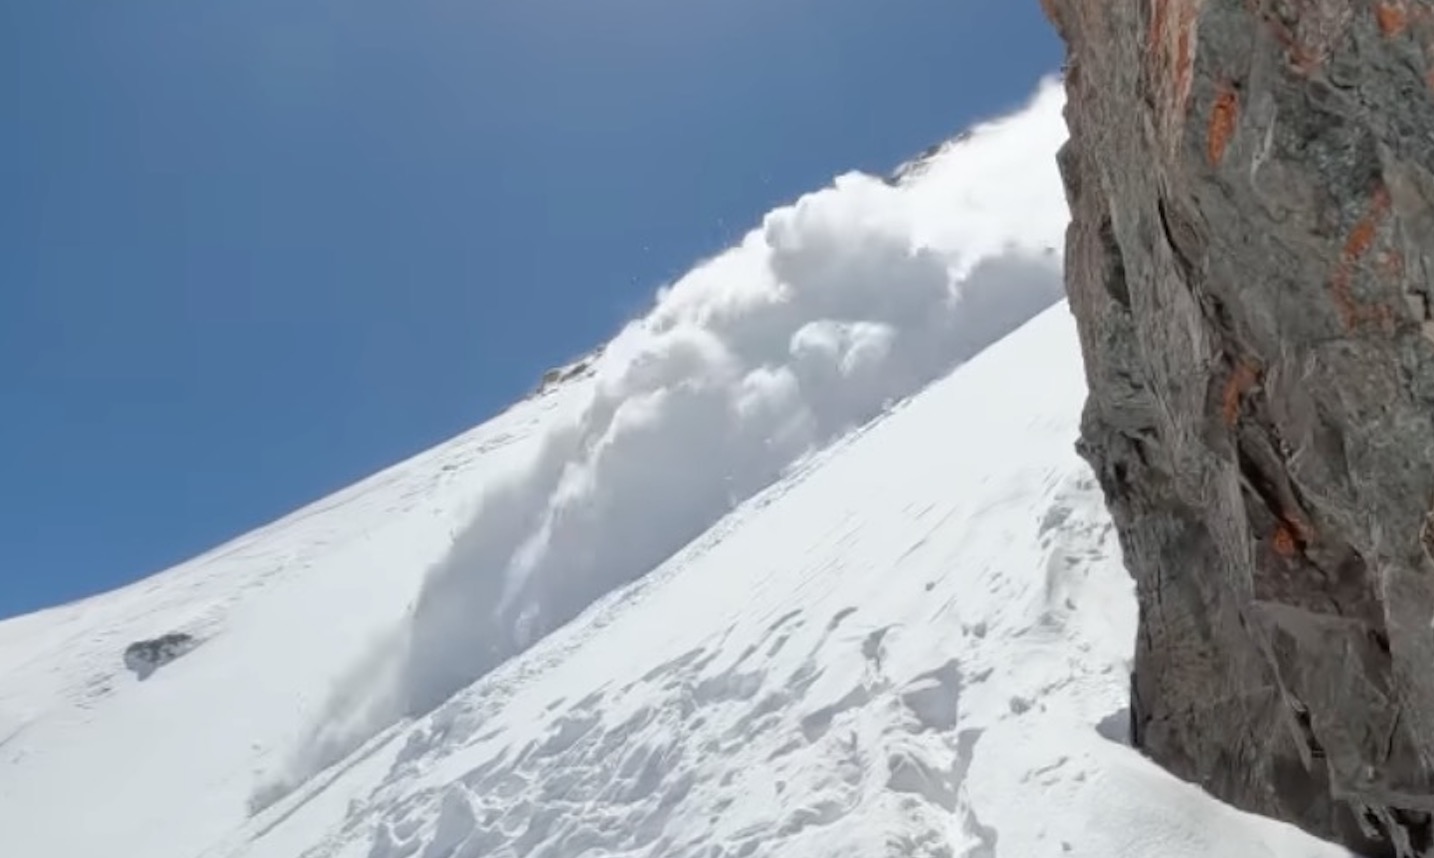 VIDEO: Two Skiers Caught In Avalanche In Colorado's San Juan Mountains